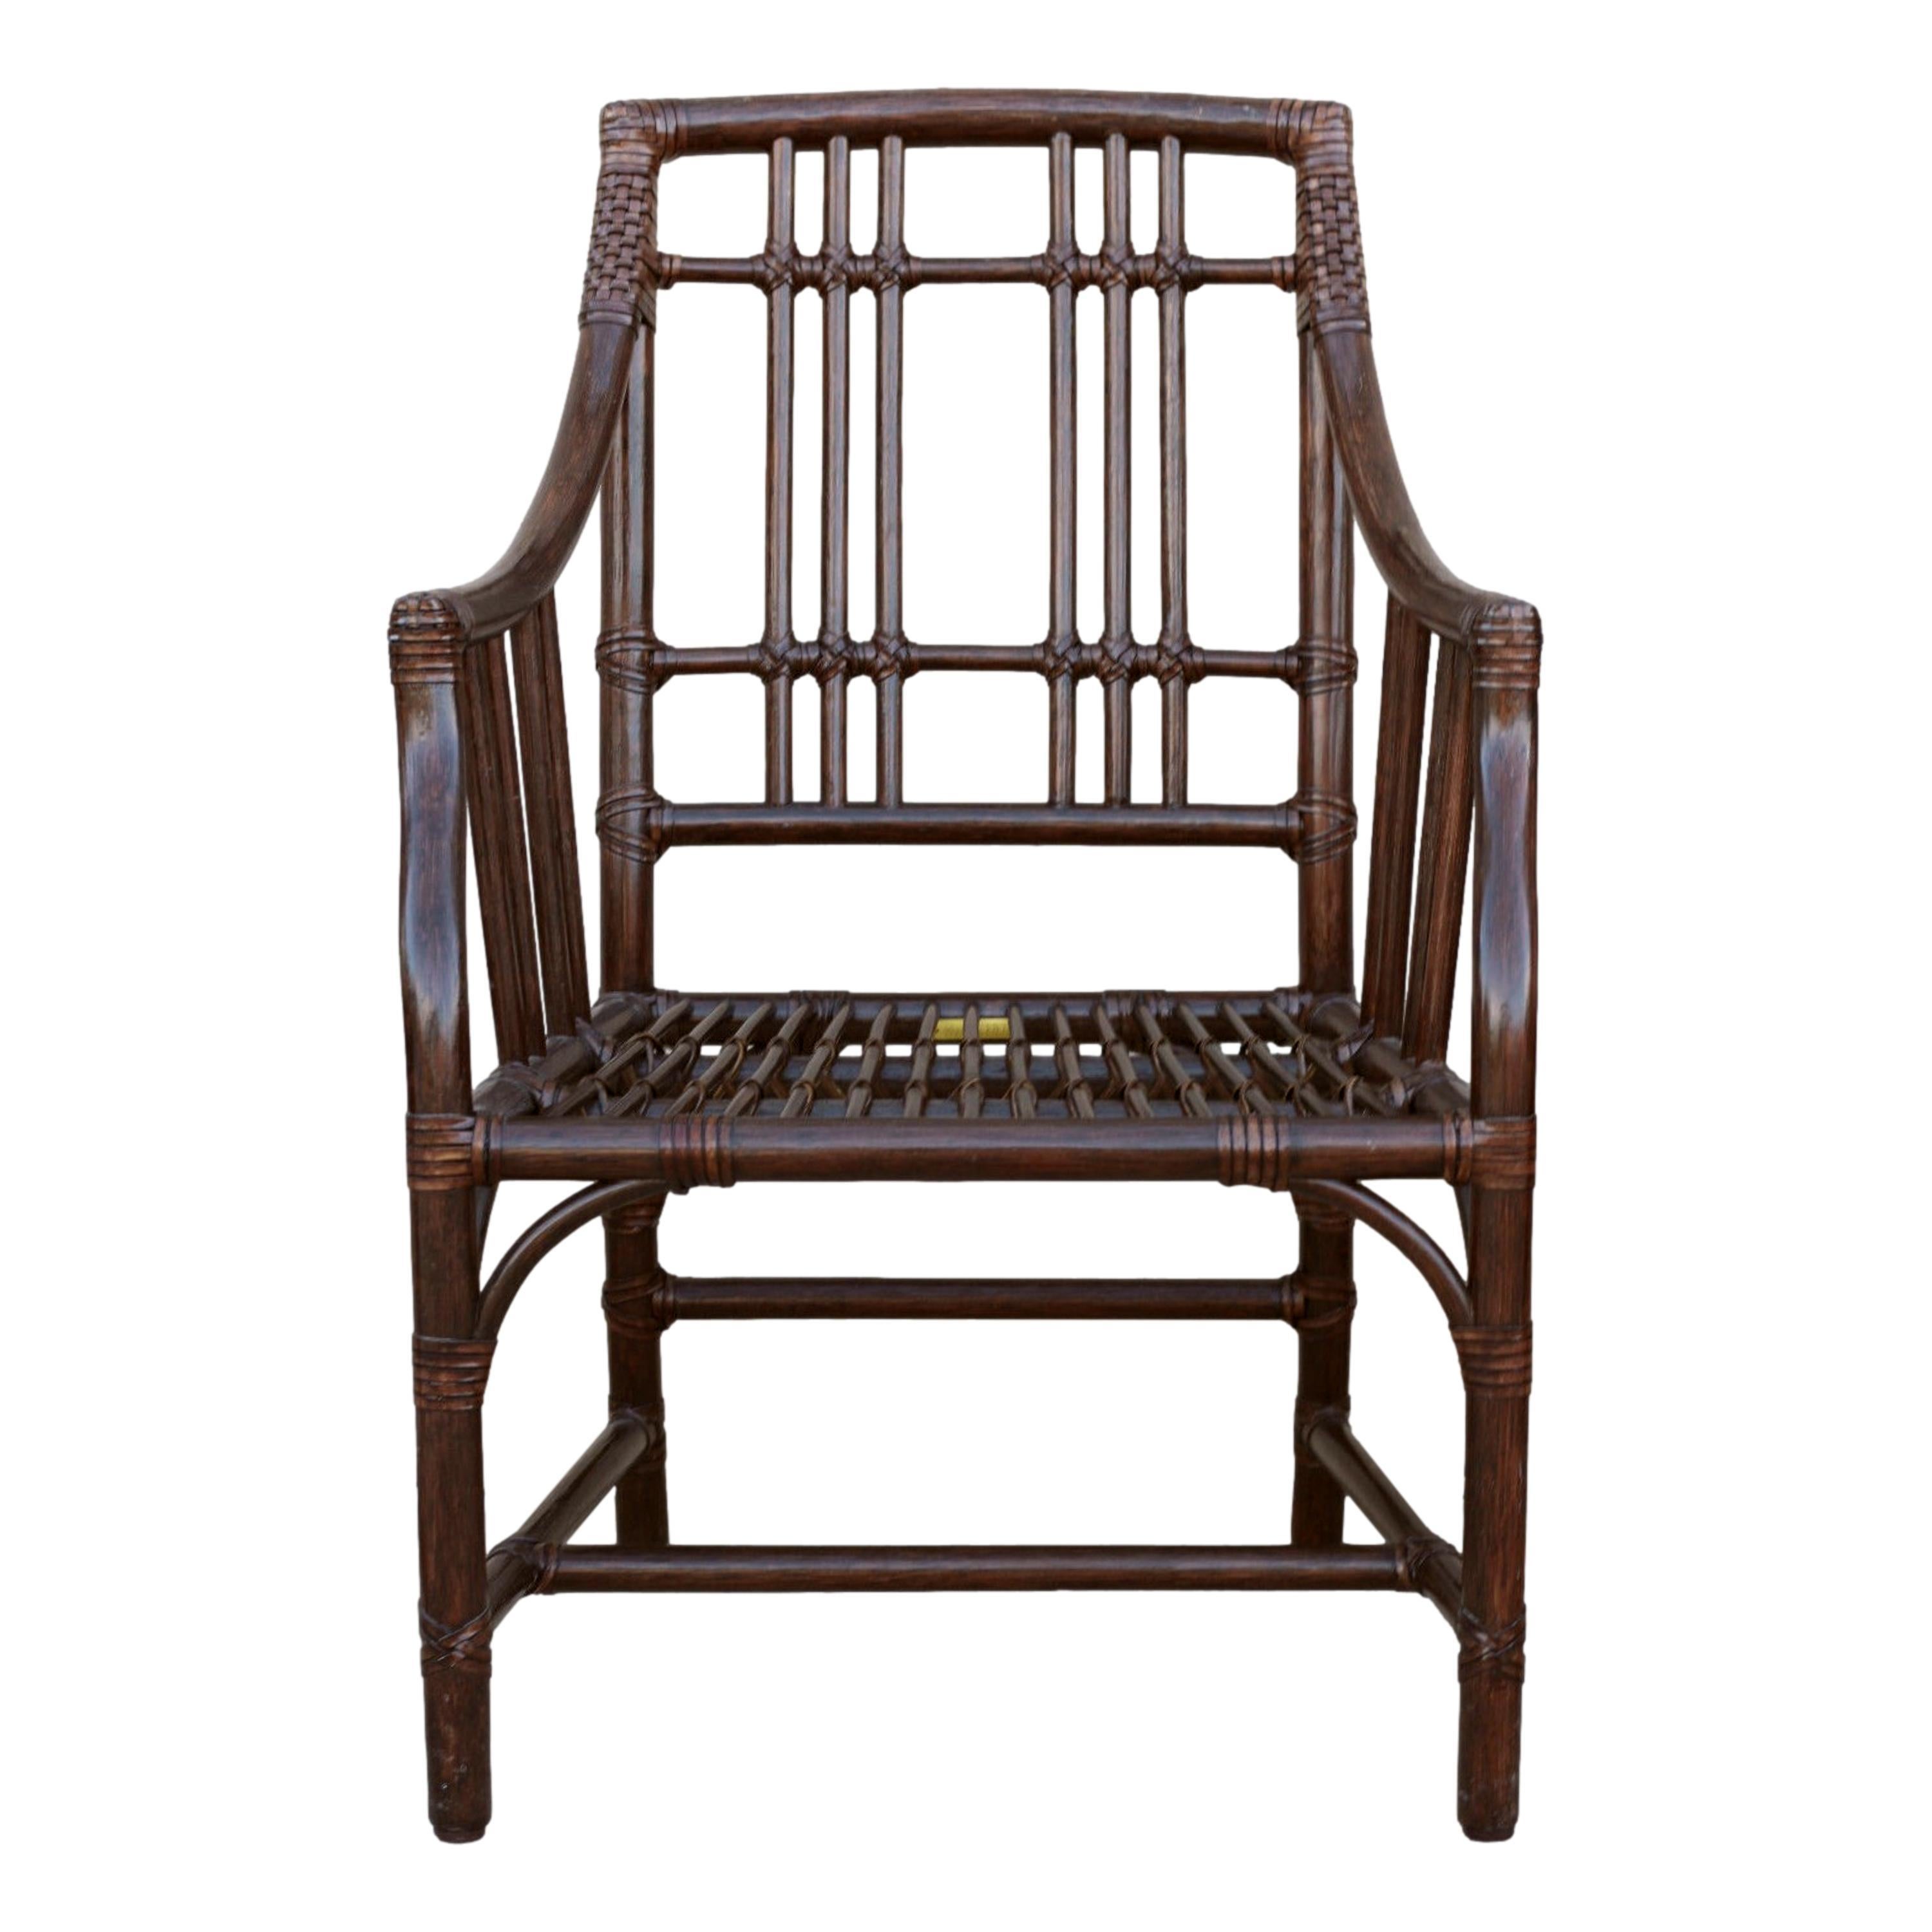 A pair of McGuire Balboa Rattan Arm Chairs or Dining Chairs. Featuring Craftsman details, the Balboa Arm Chair, designed by Elinor McGuire, is a classic form that could fit many different spaces. Chairs have a rich dark tobacco finish, and the